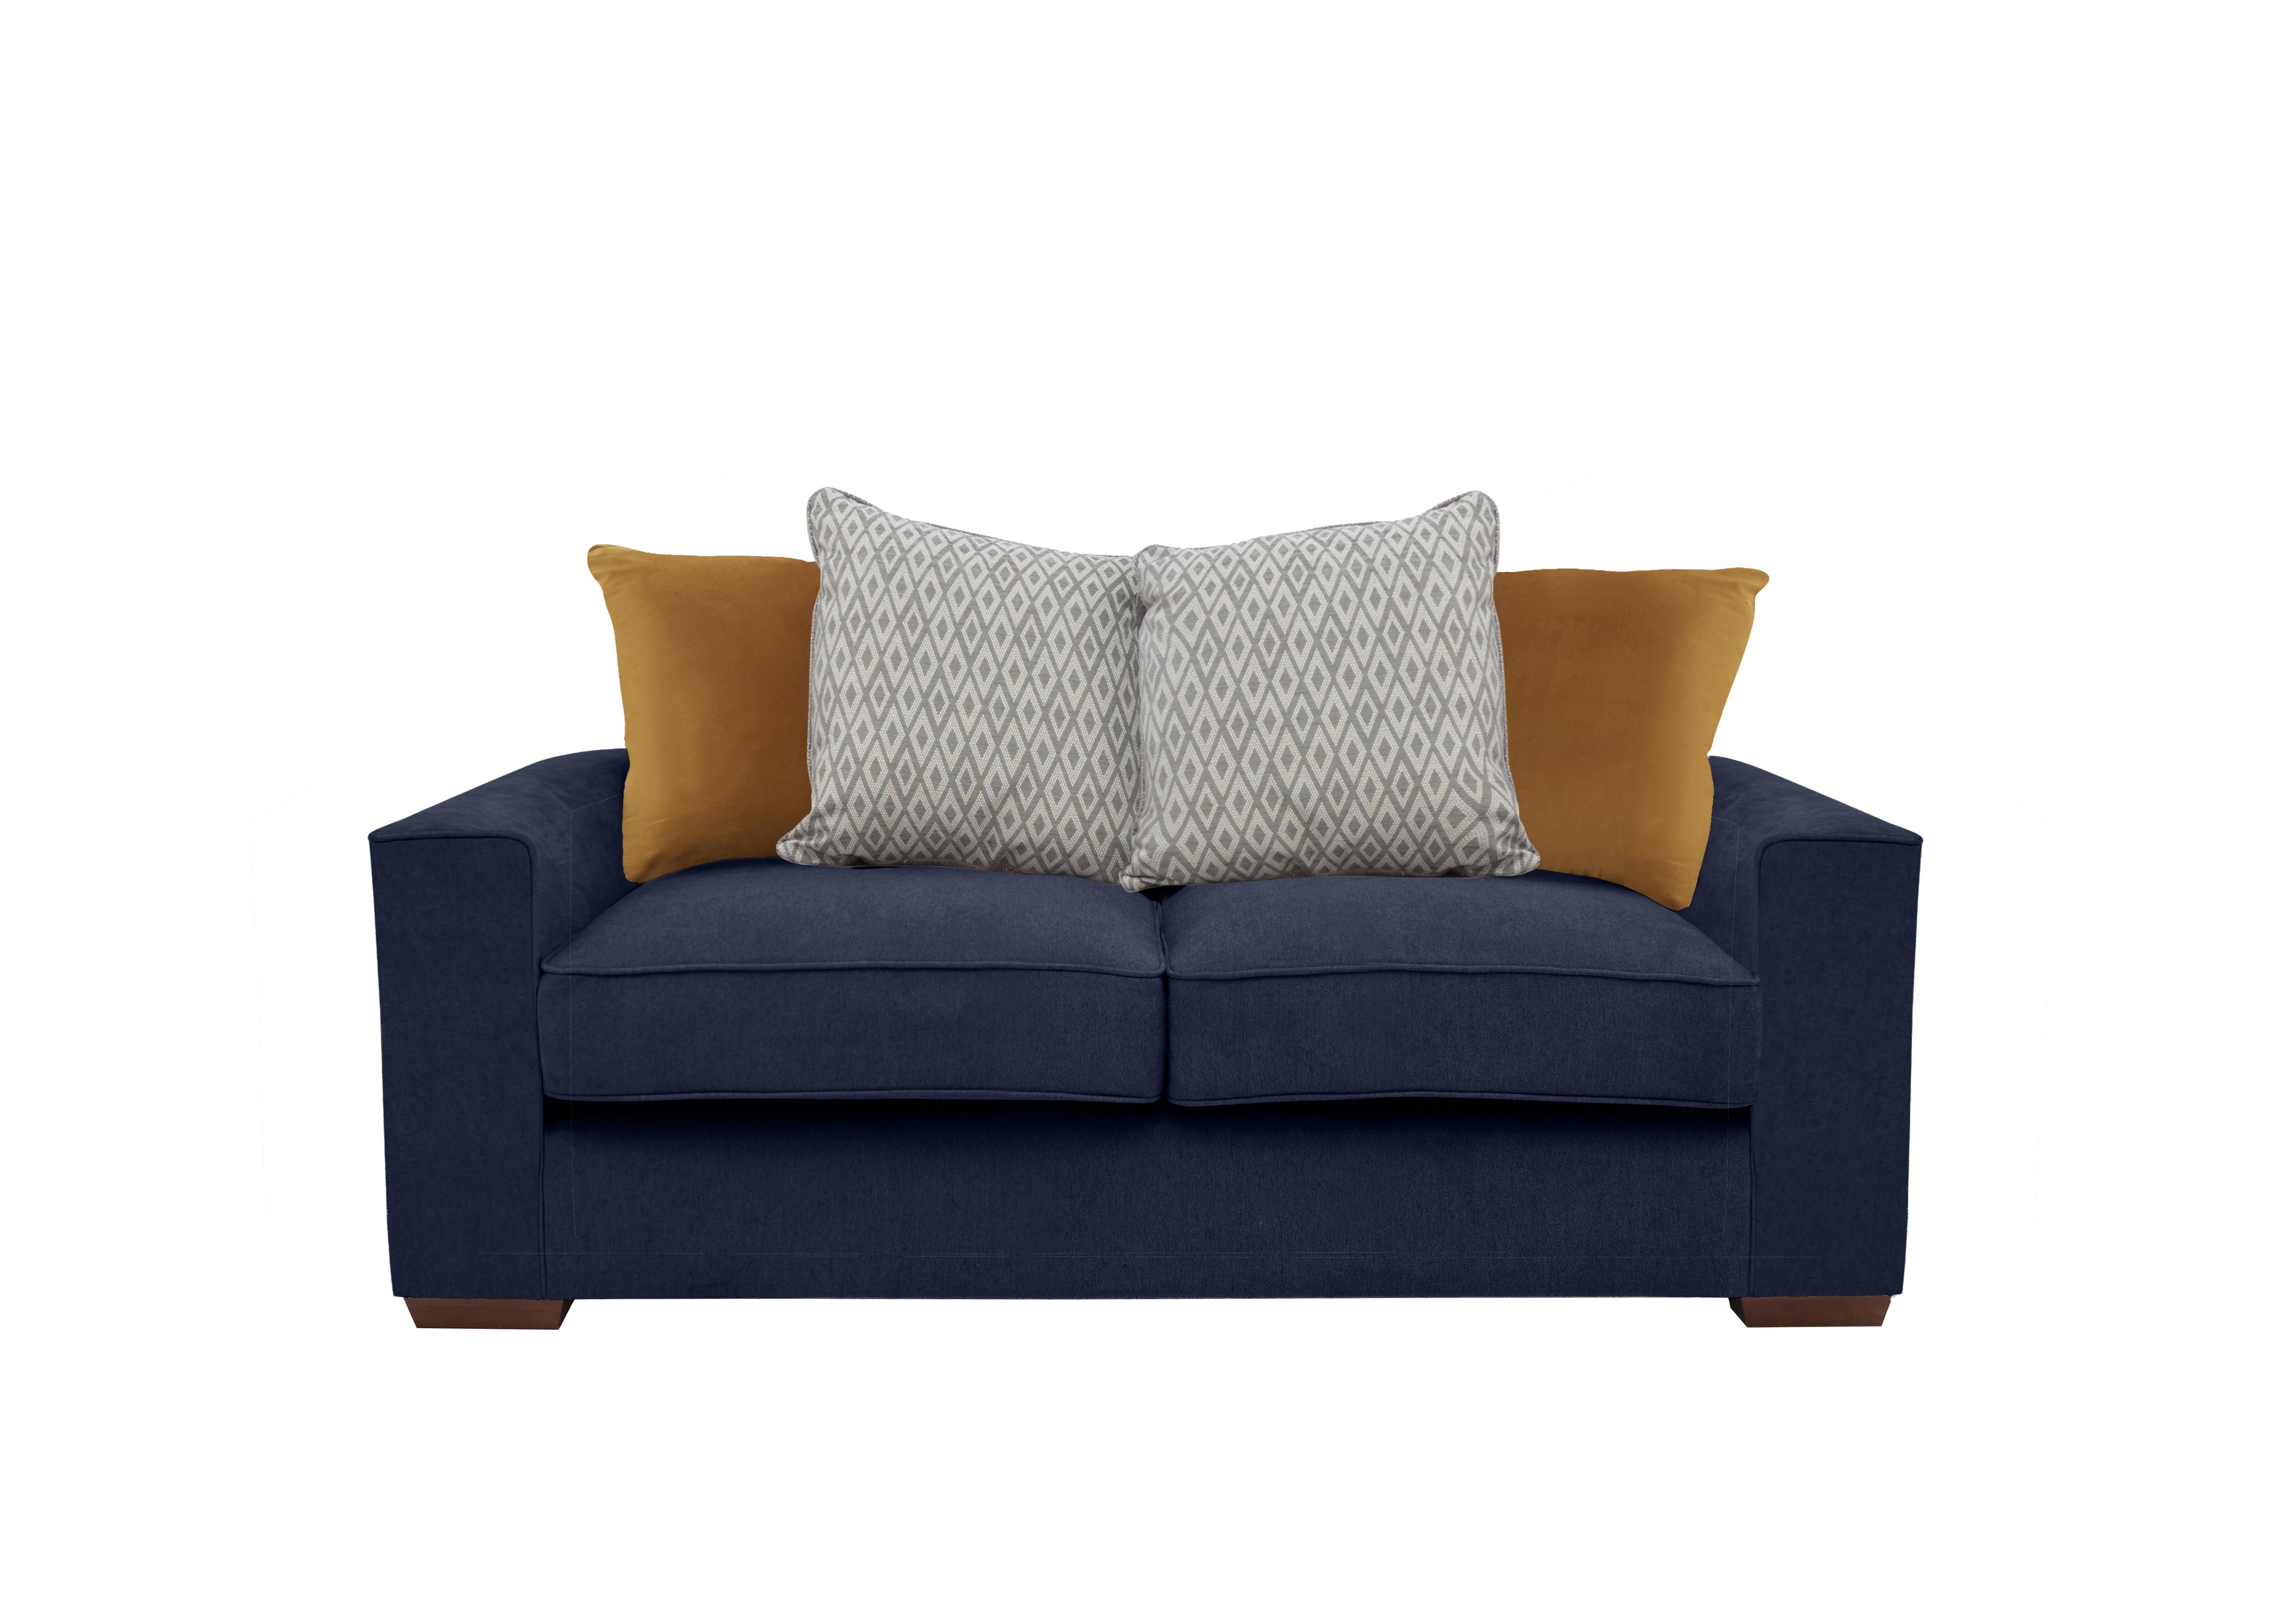 Cory 2 Seater Fabric Scatter Back Sofa Bed in Cosmo Navy Mustard Pack on Furniture Village